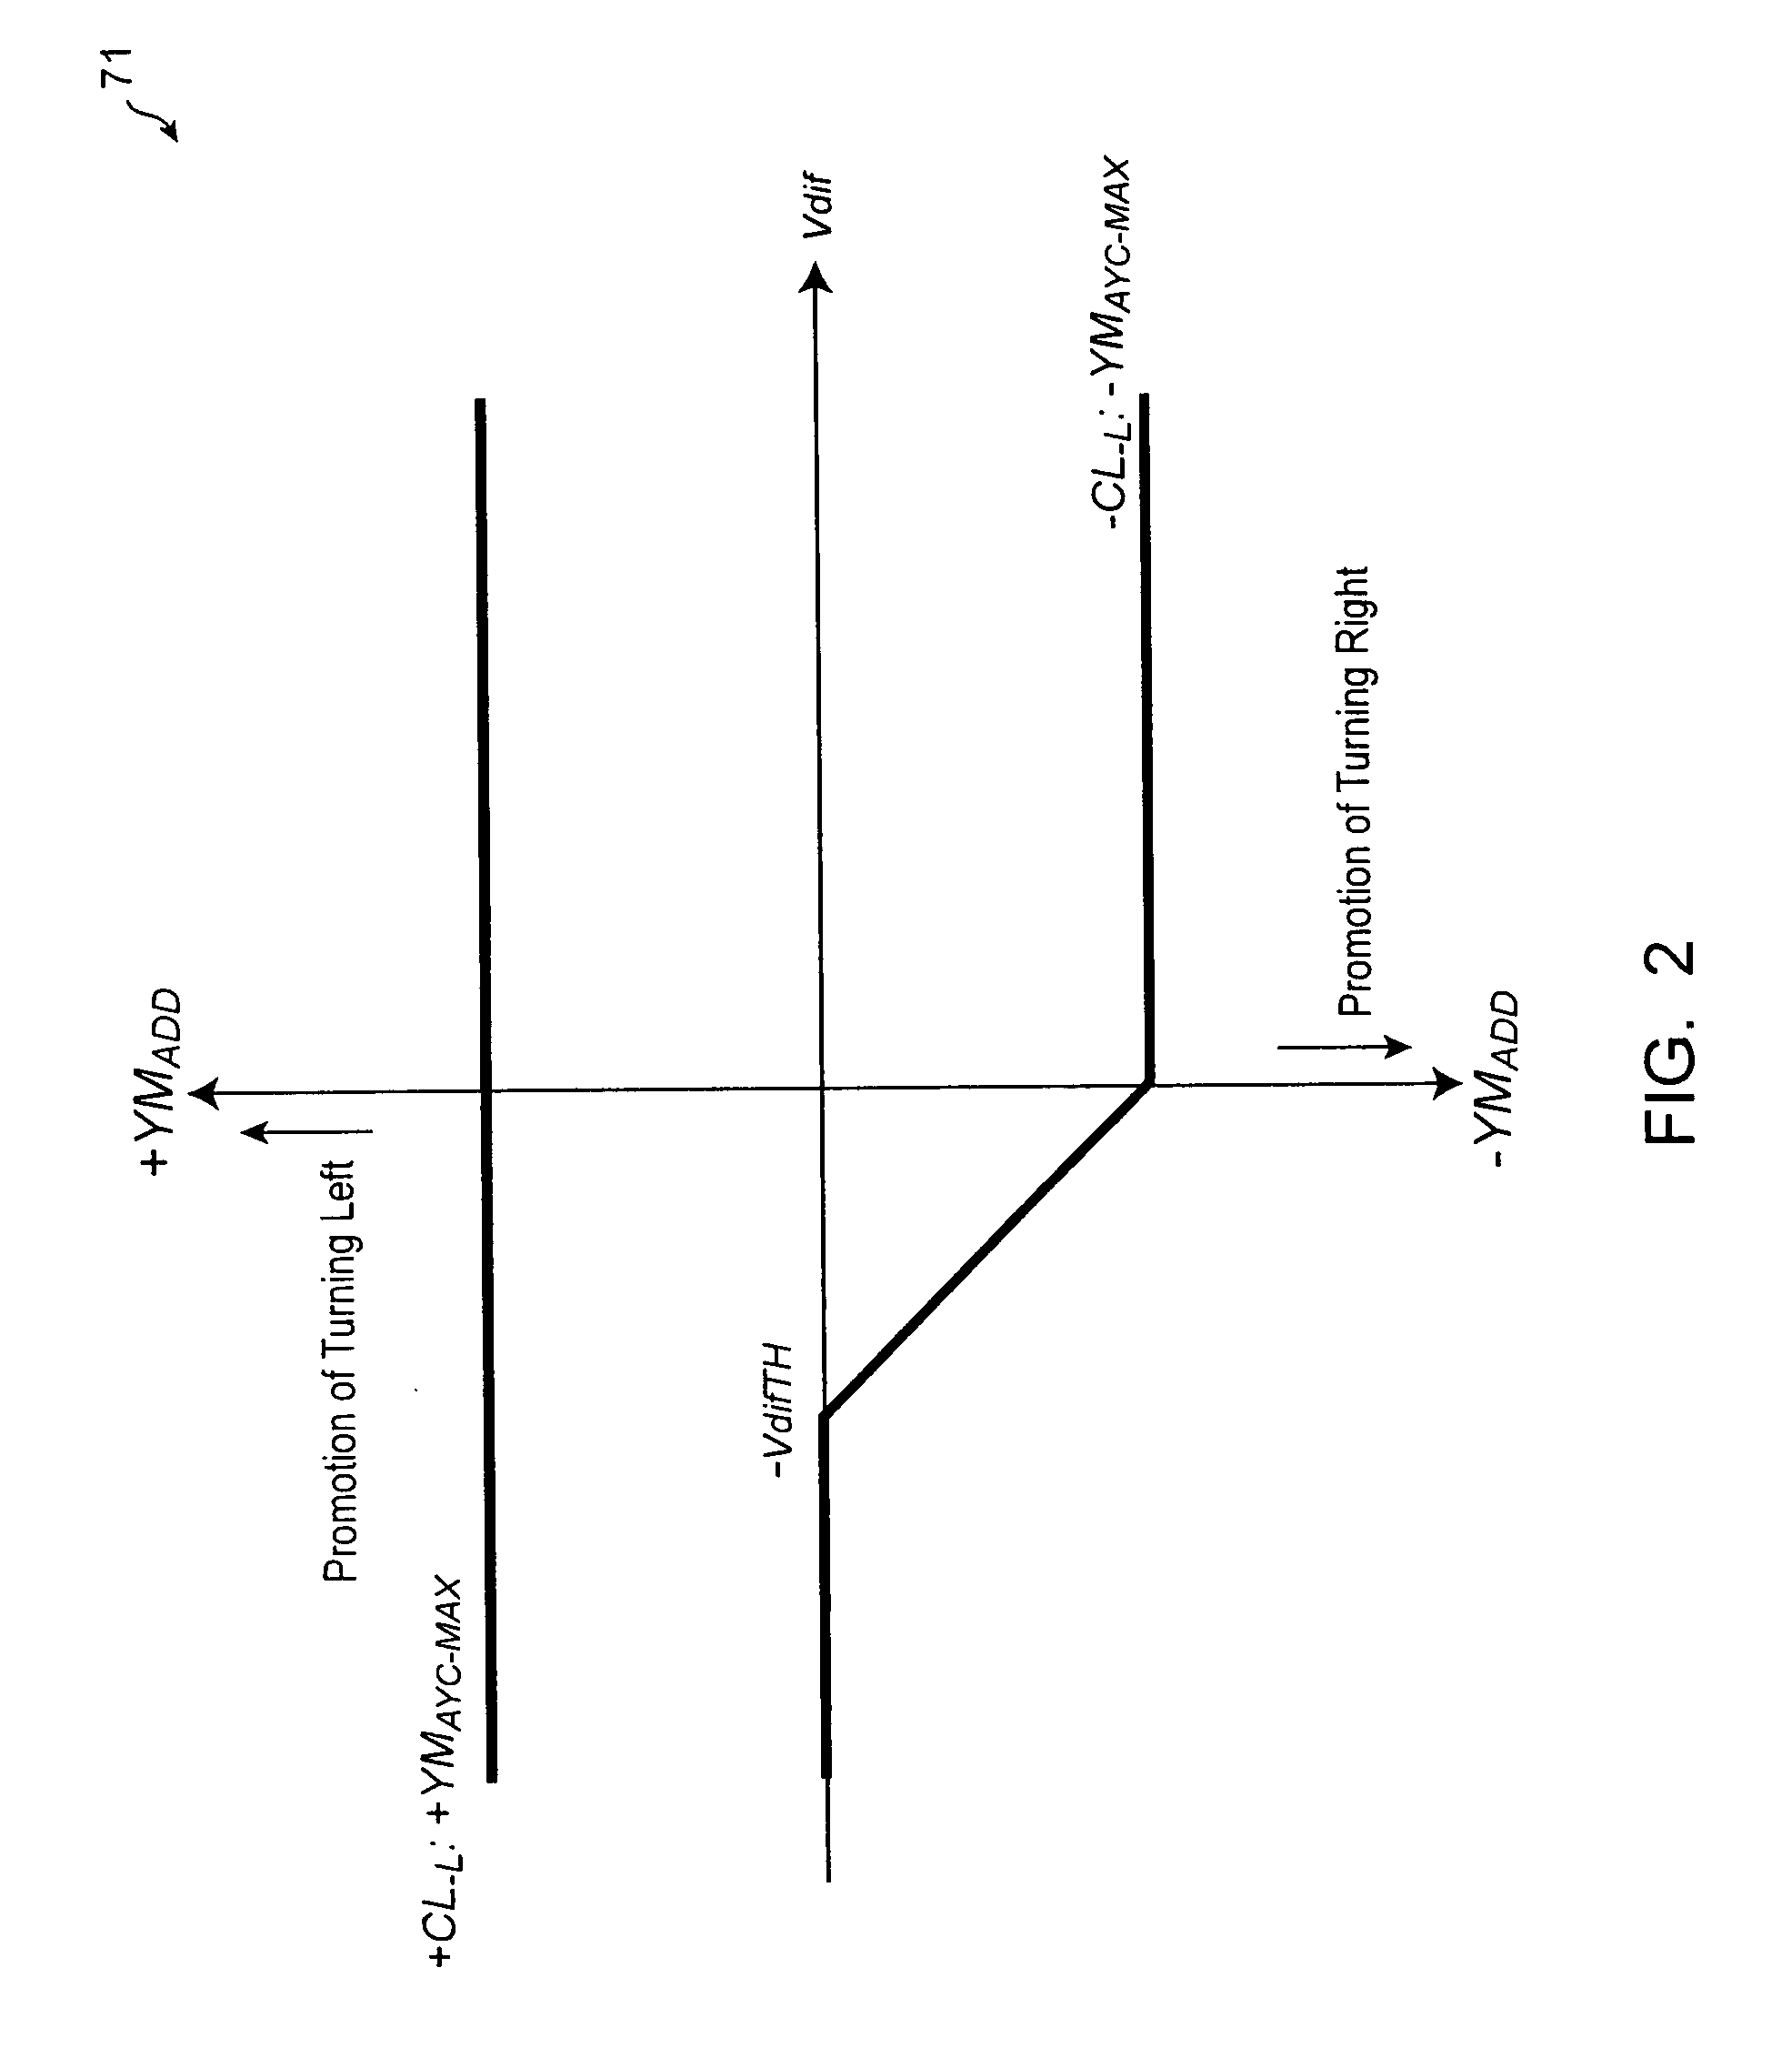 Turning control apparatus for vehicle